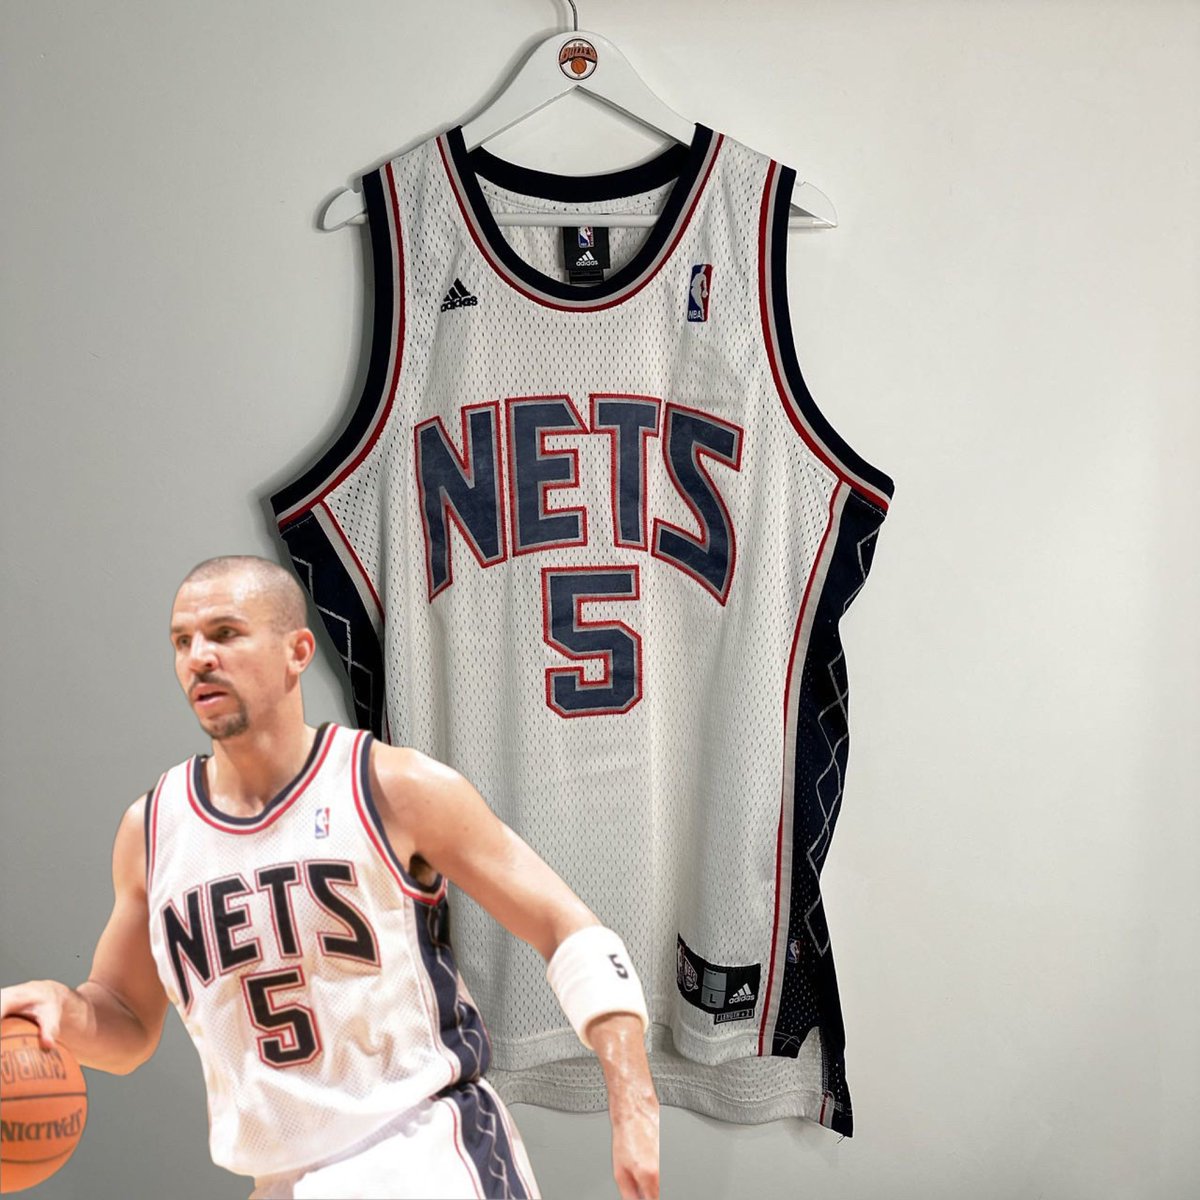 New Jersey Nets Jason Kidd Adidas swingman jersey - Size large (fits XL) 

This cheeky early 2000’s piece will be coming to our Buzzer website at 8pm tonight. 

But do not forget there will be one Jersey landing today.

#newjersey #nets #jasonkidd